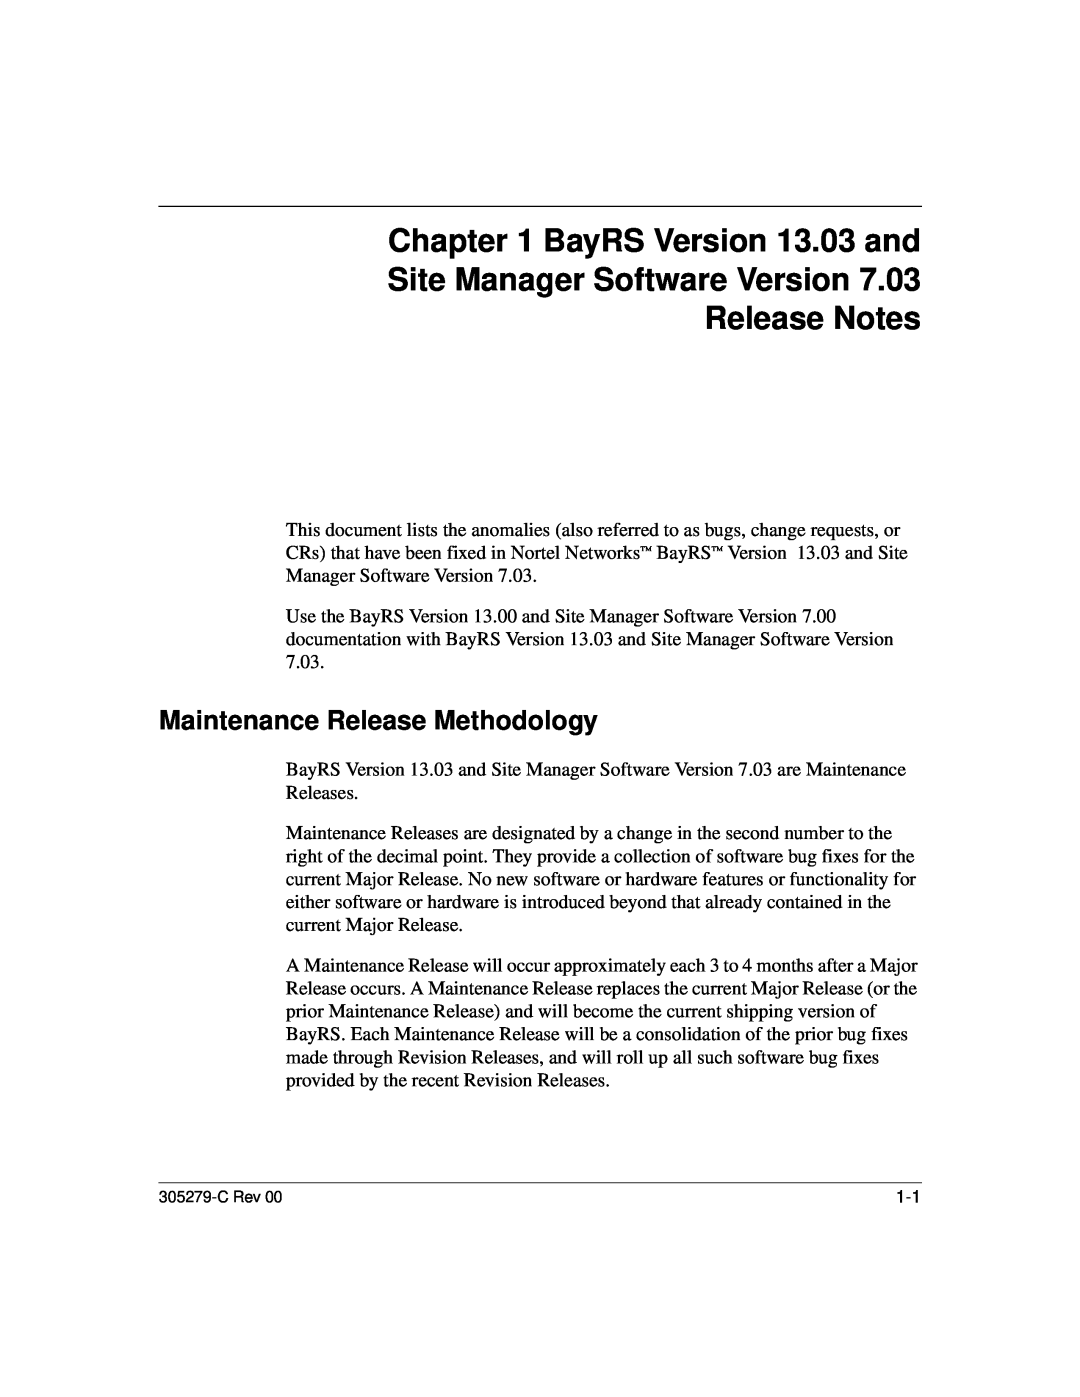 Nortel Networks BayRS Version 13.03 and Site Manager Software Version, Release Notes, Maintenance Release Methodology 